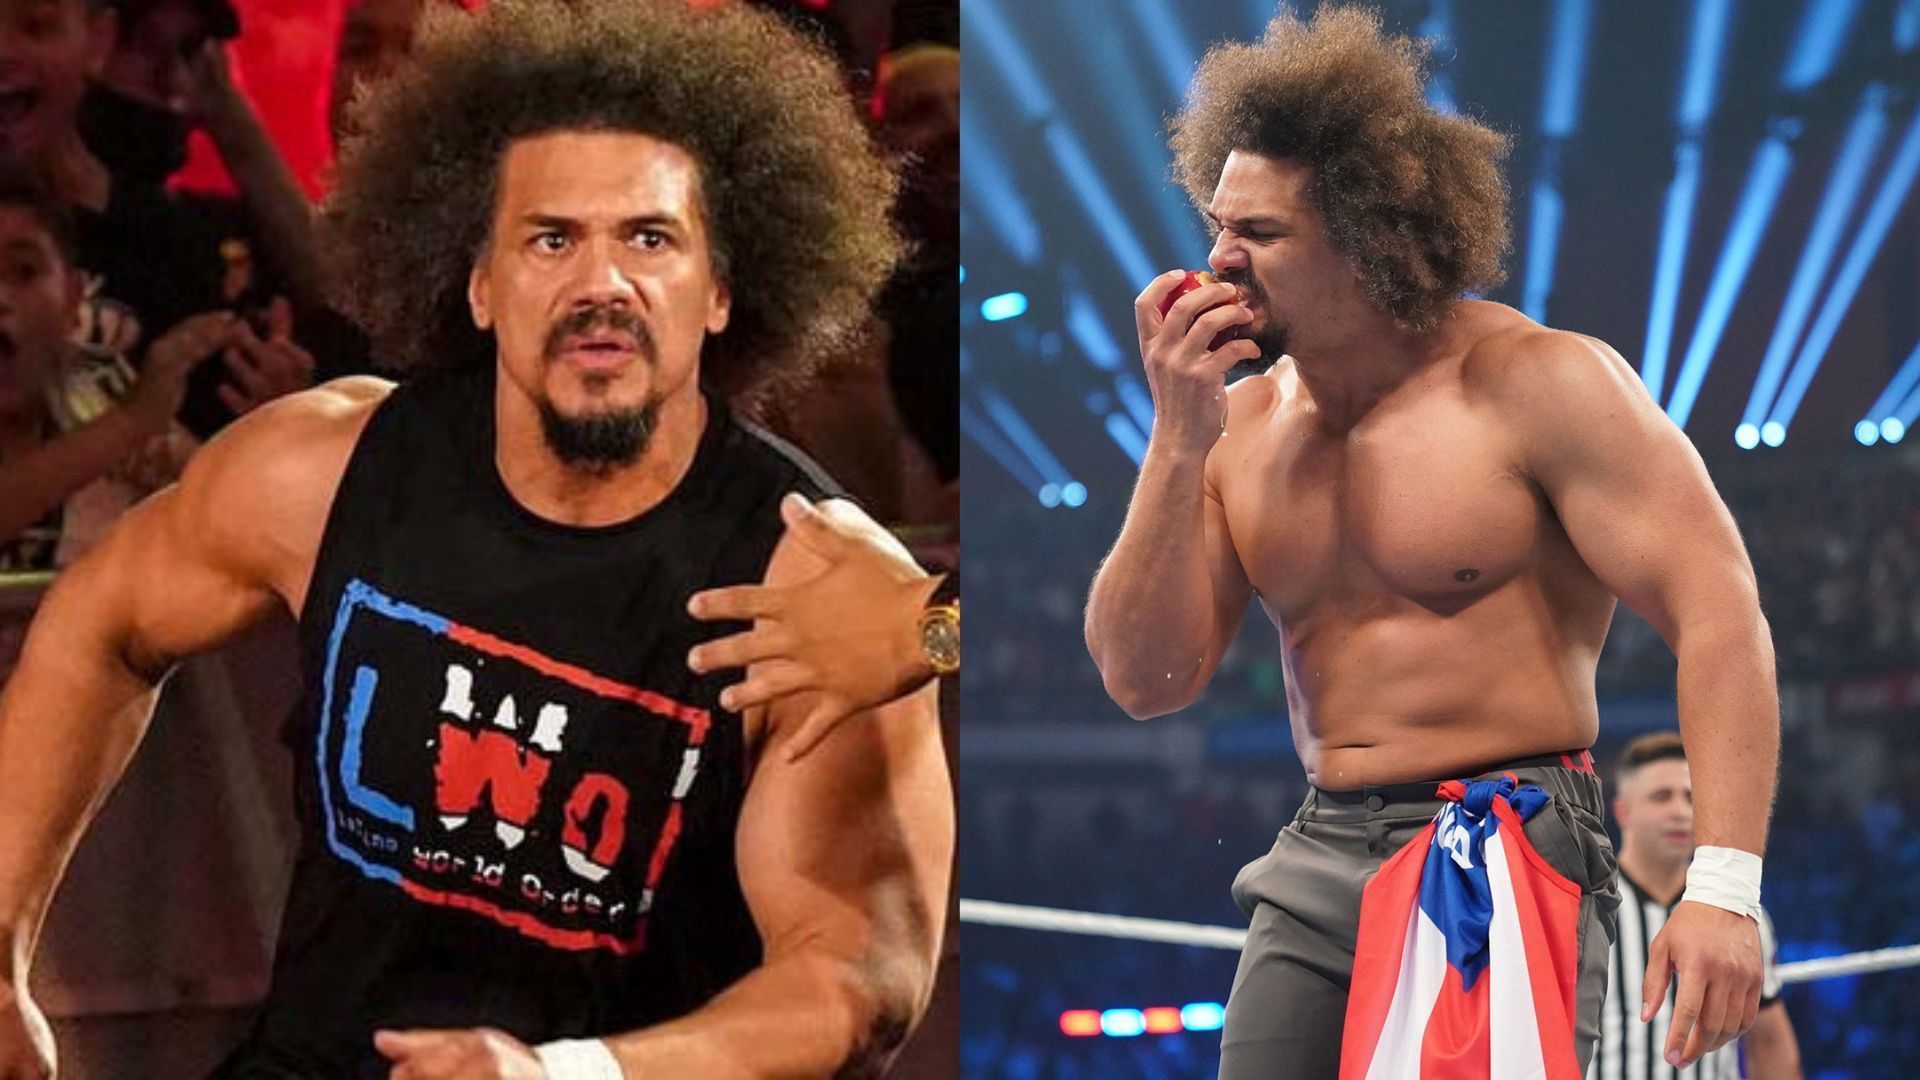 Carlito is expected to make his WWE return